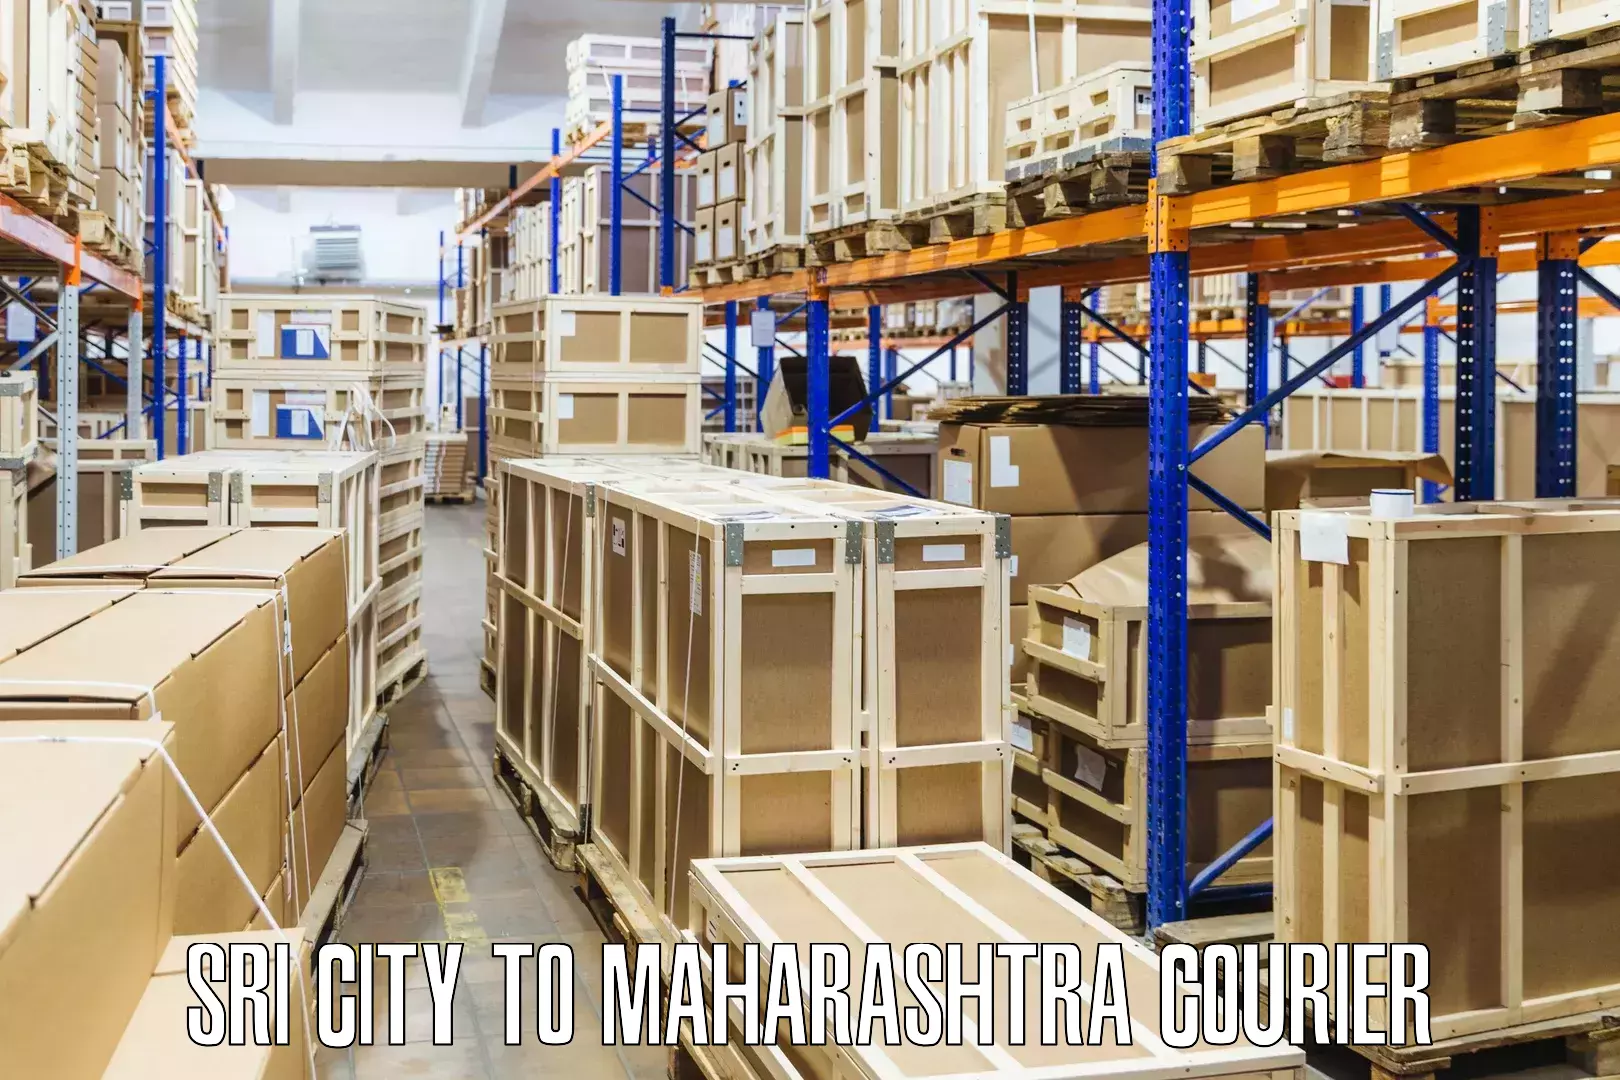 Advanced tracking systems Sri City to Mantha